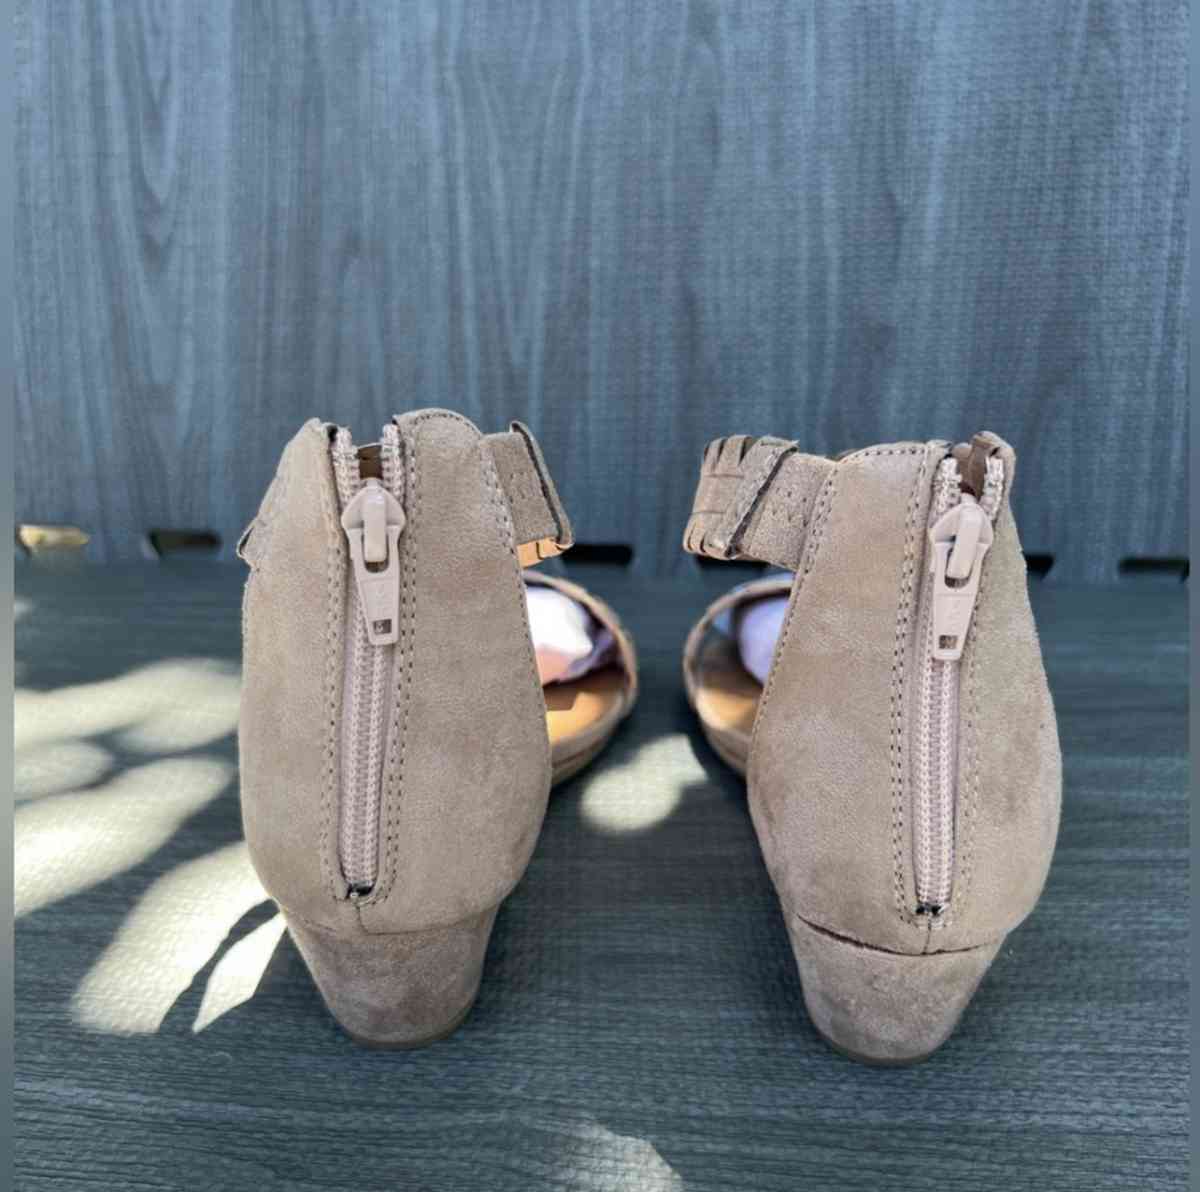 nude sandals size 6 and a half